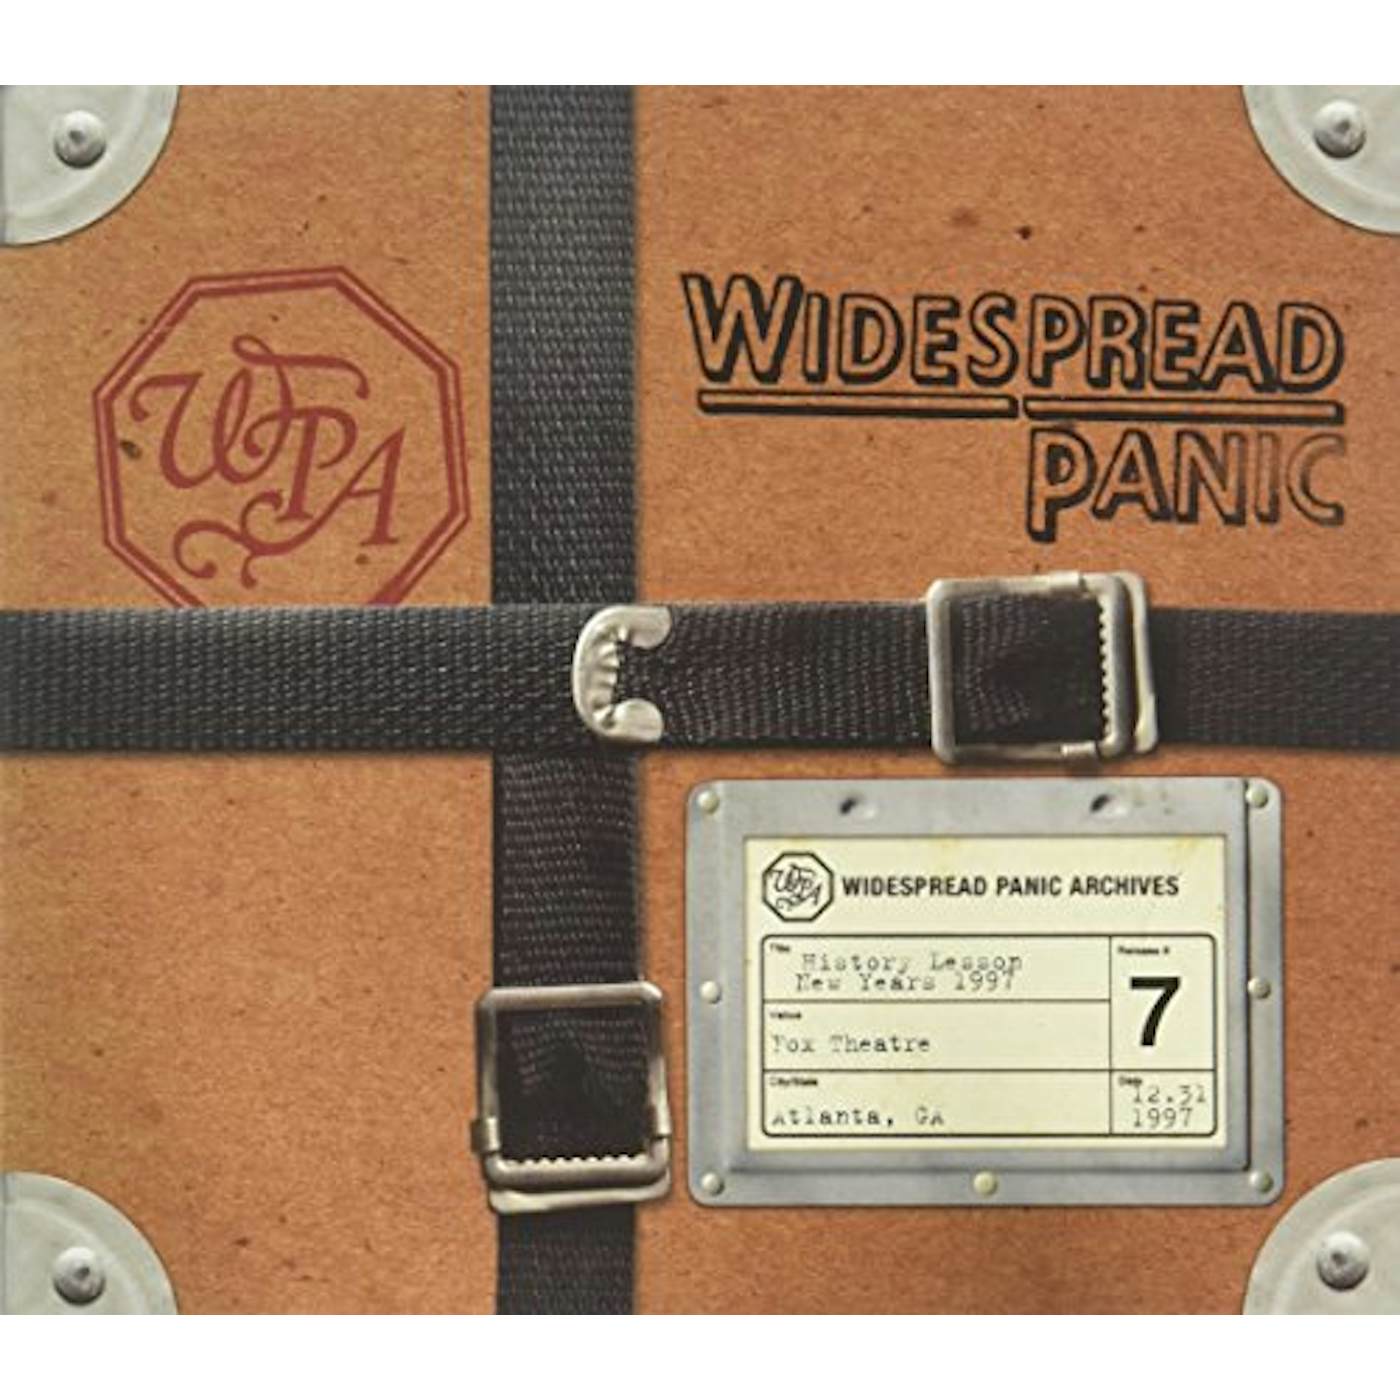 Widespread Panic HISTORY LESSON NEW YEAR'S 1997 CD